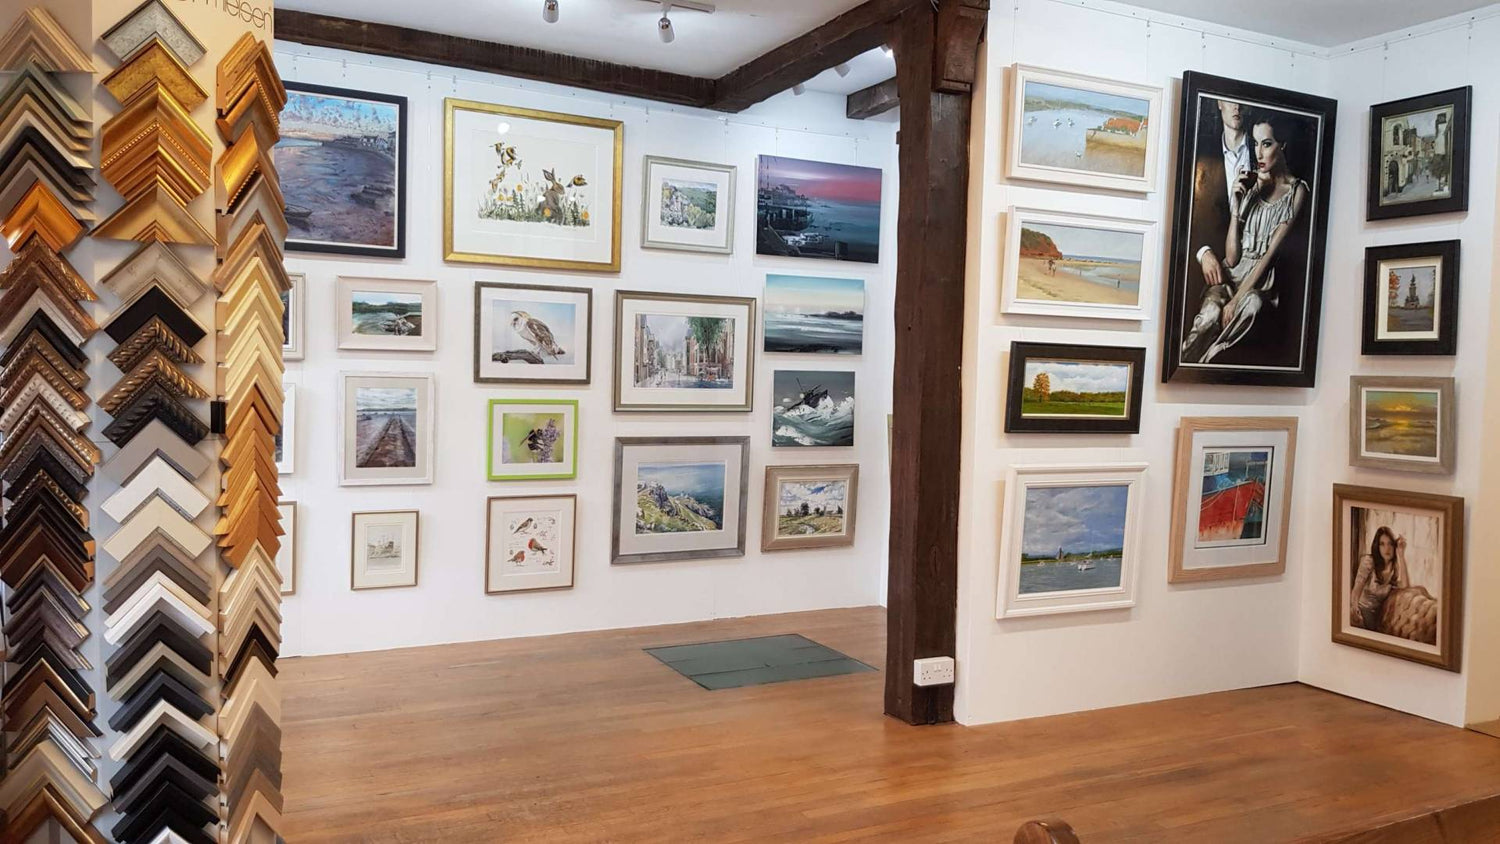 South Gate Gallery Exeter Devon